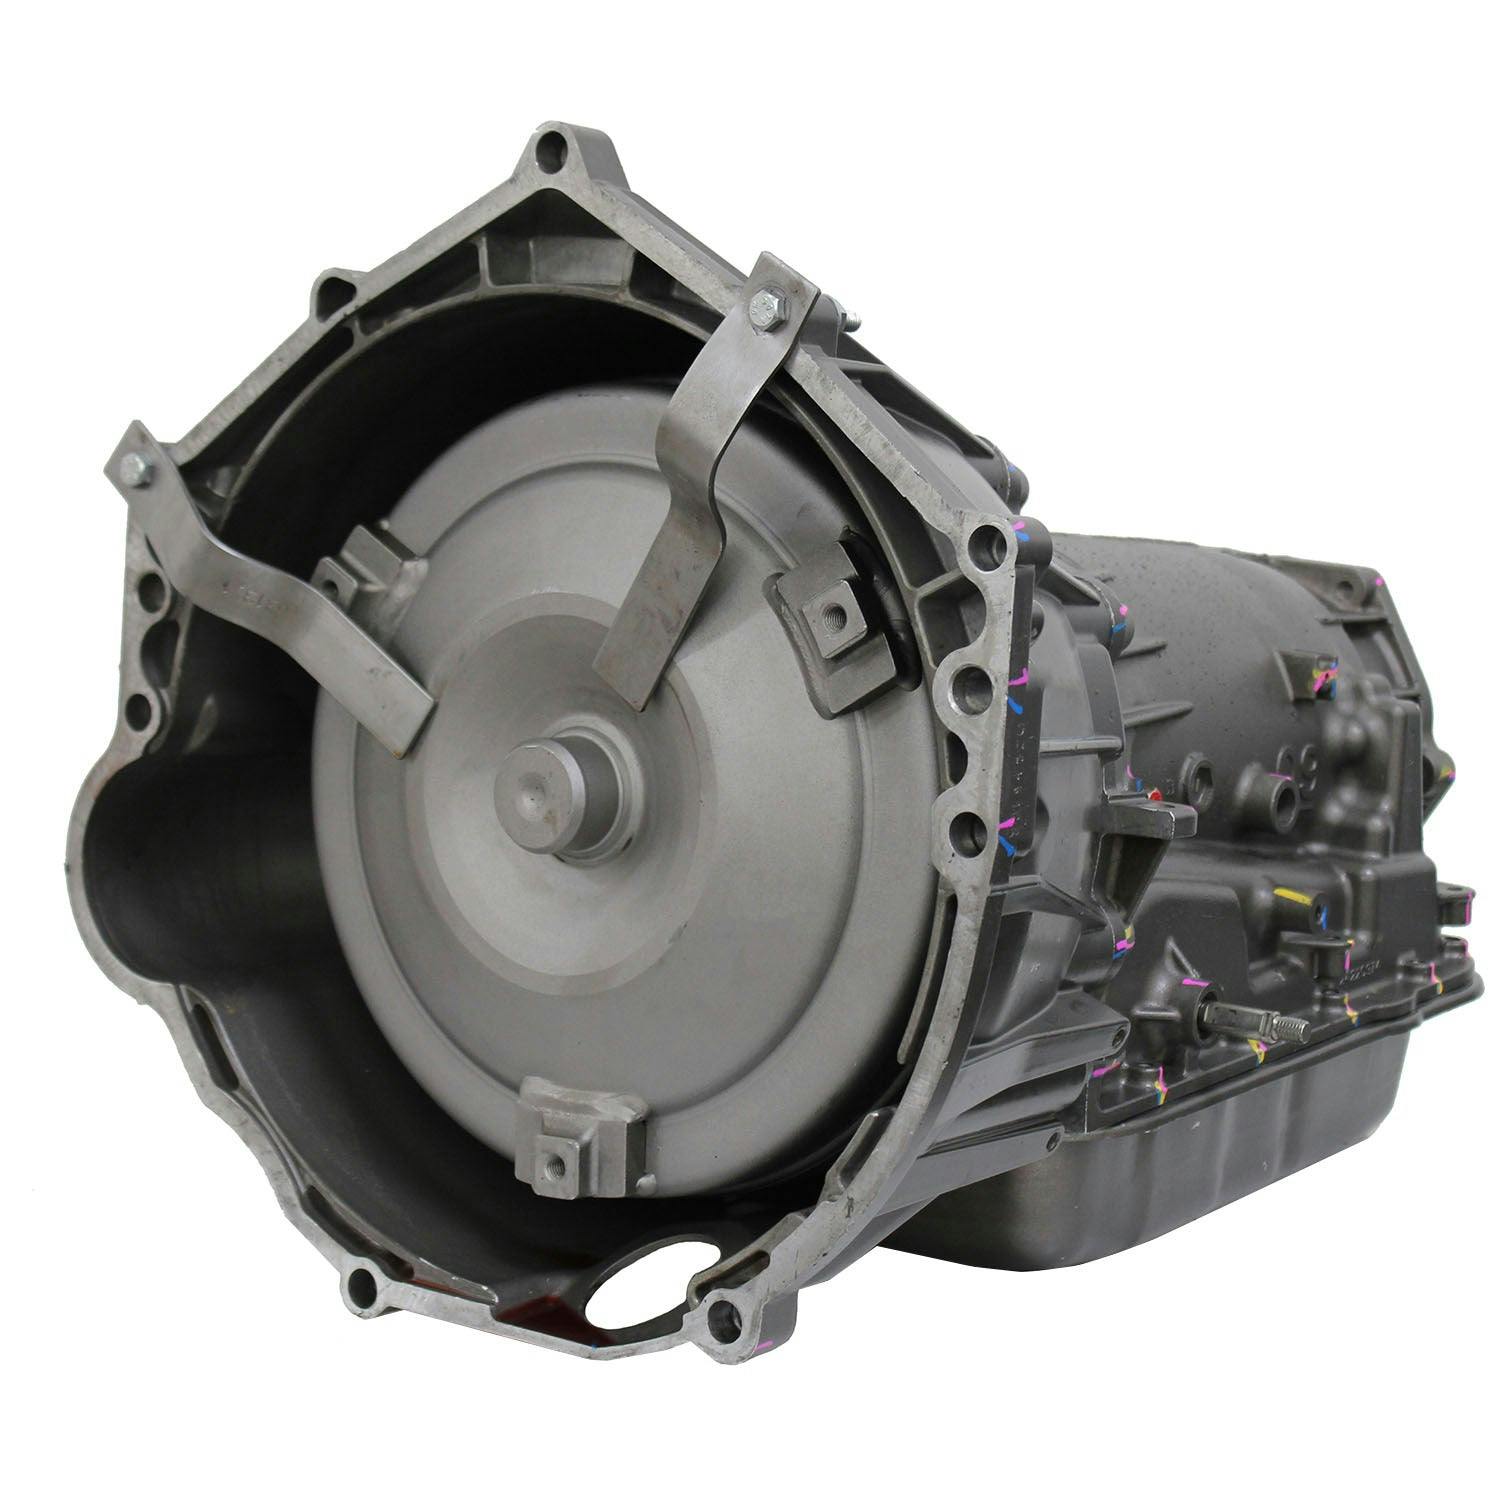 Automatic Transmission for 2009-2012 Chevrolet Colorado/GMC Canyon RWD with 5.3L V8 Engine